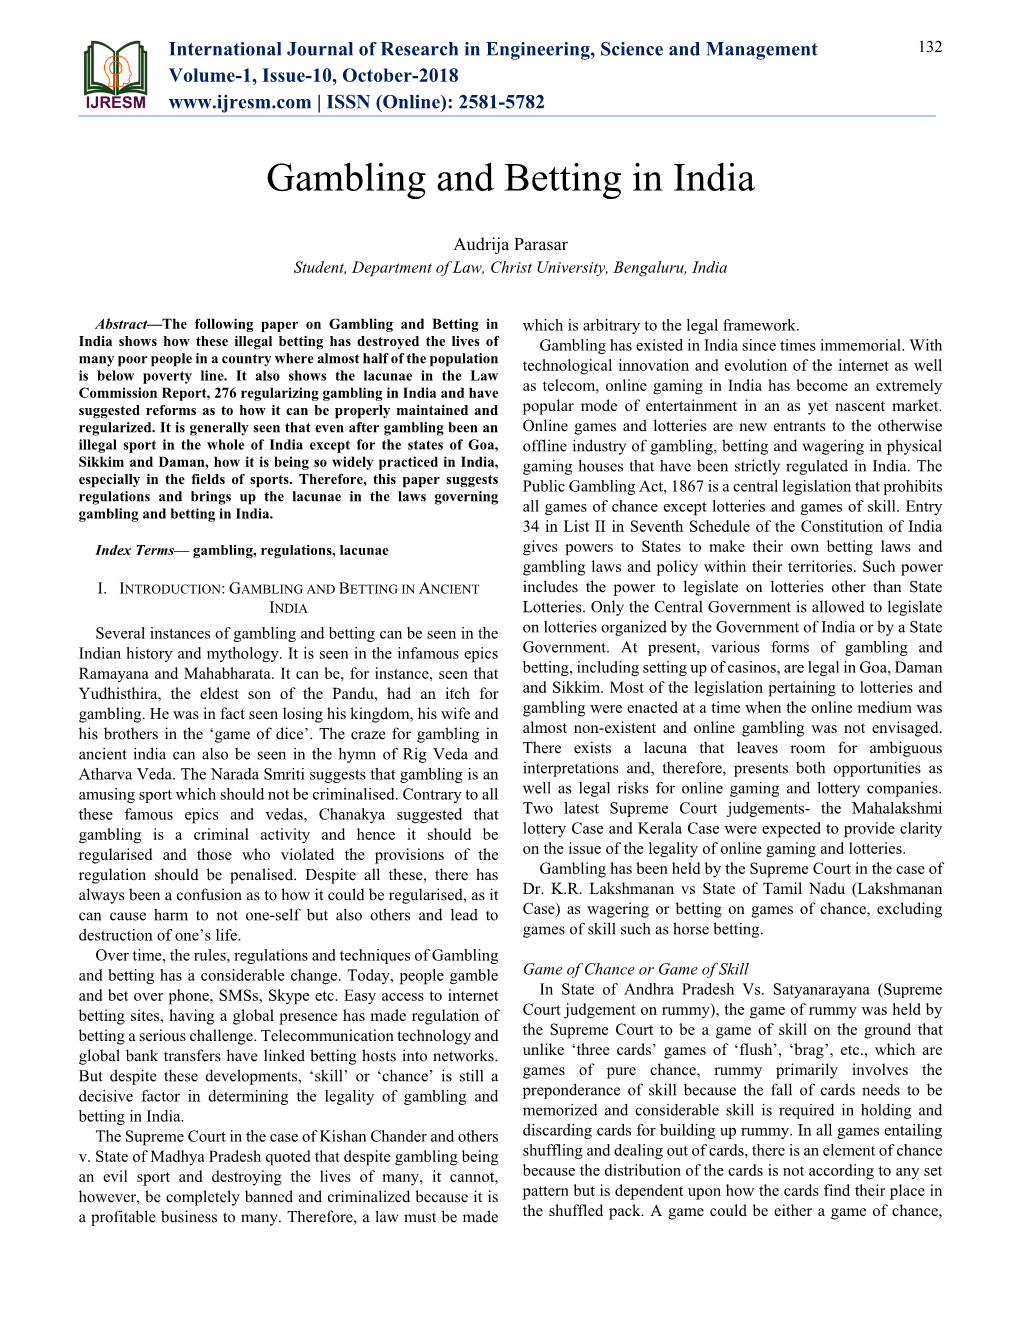 Gambling and Betting in India